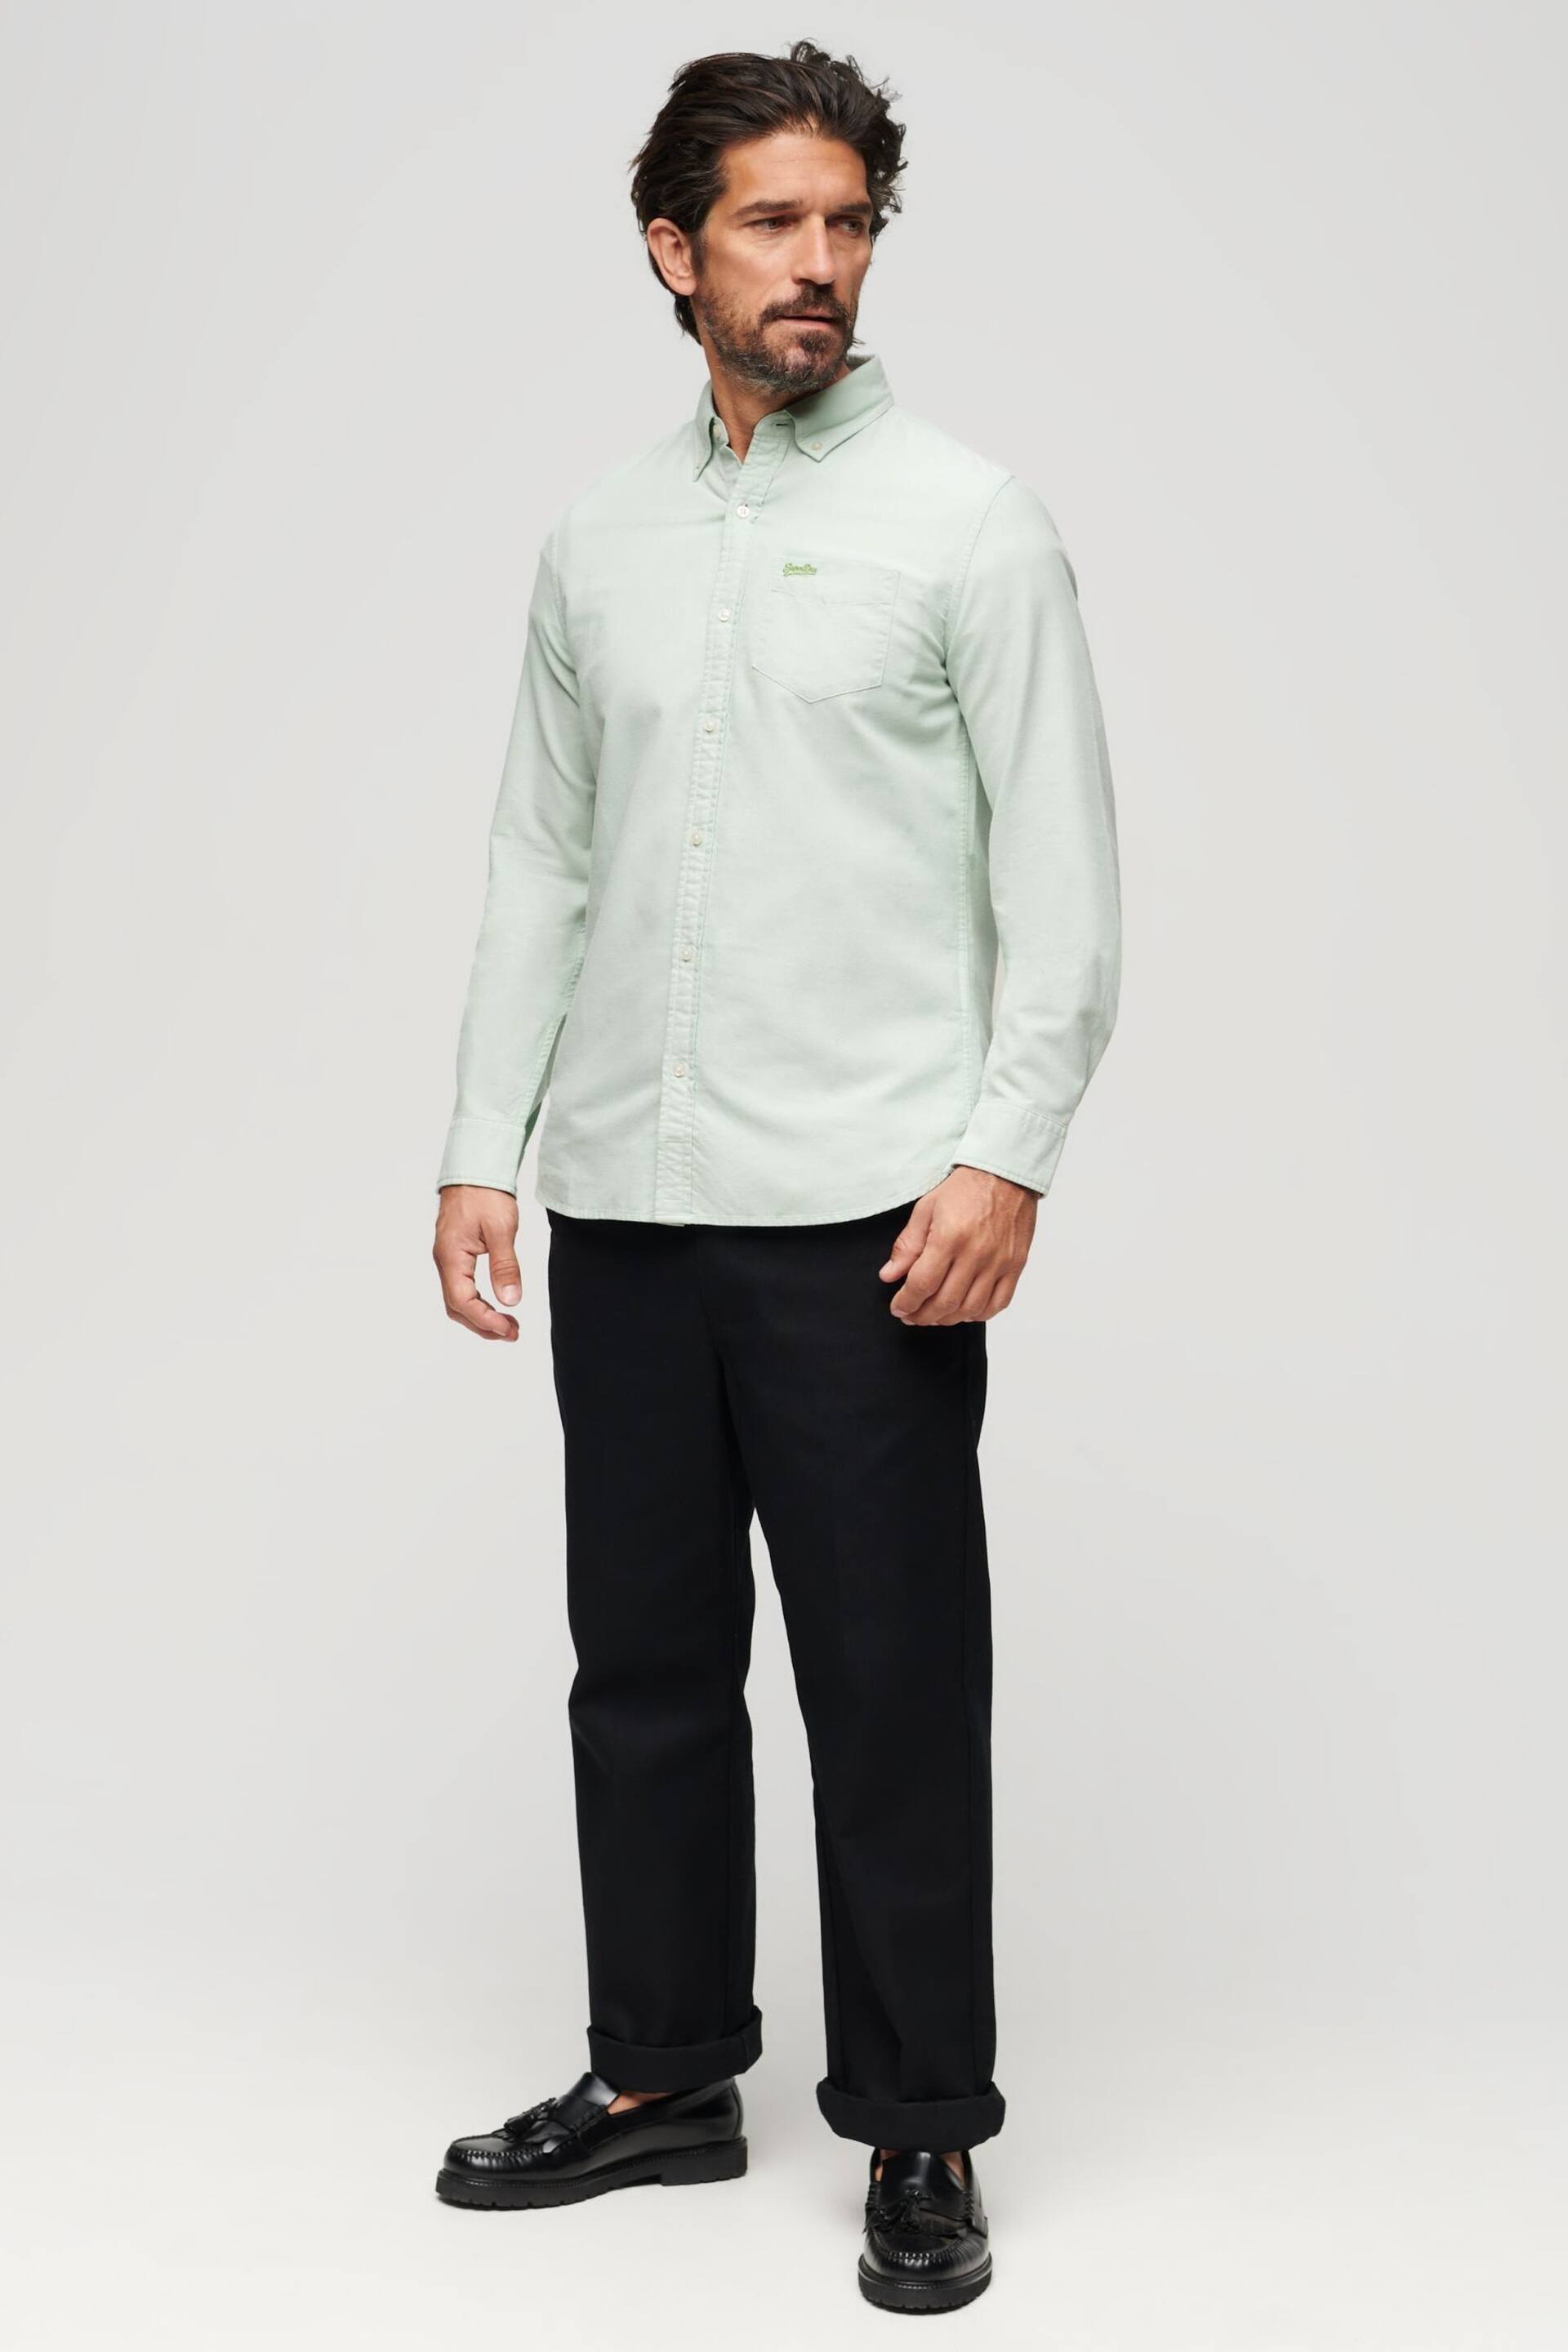 Superdry Light Green Cotton Long Sleeved Oxford Shirt - Image 2 of 5